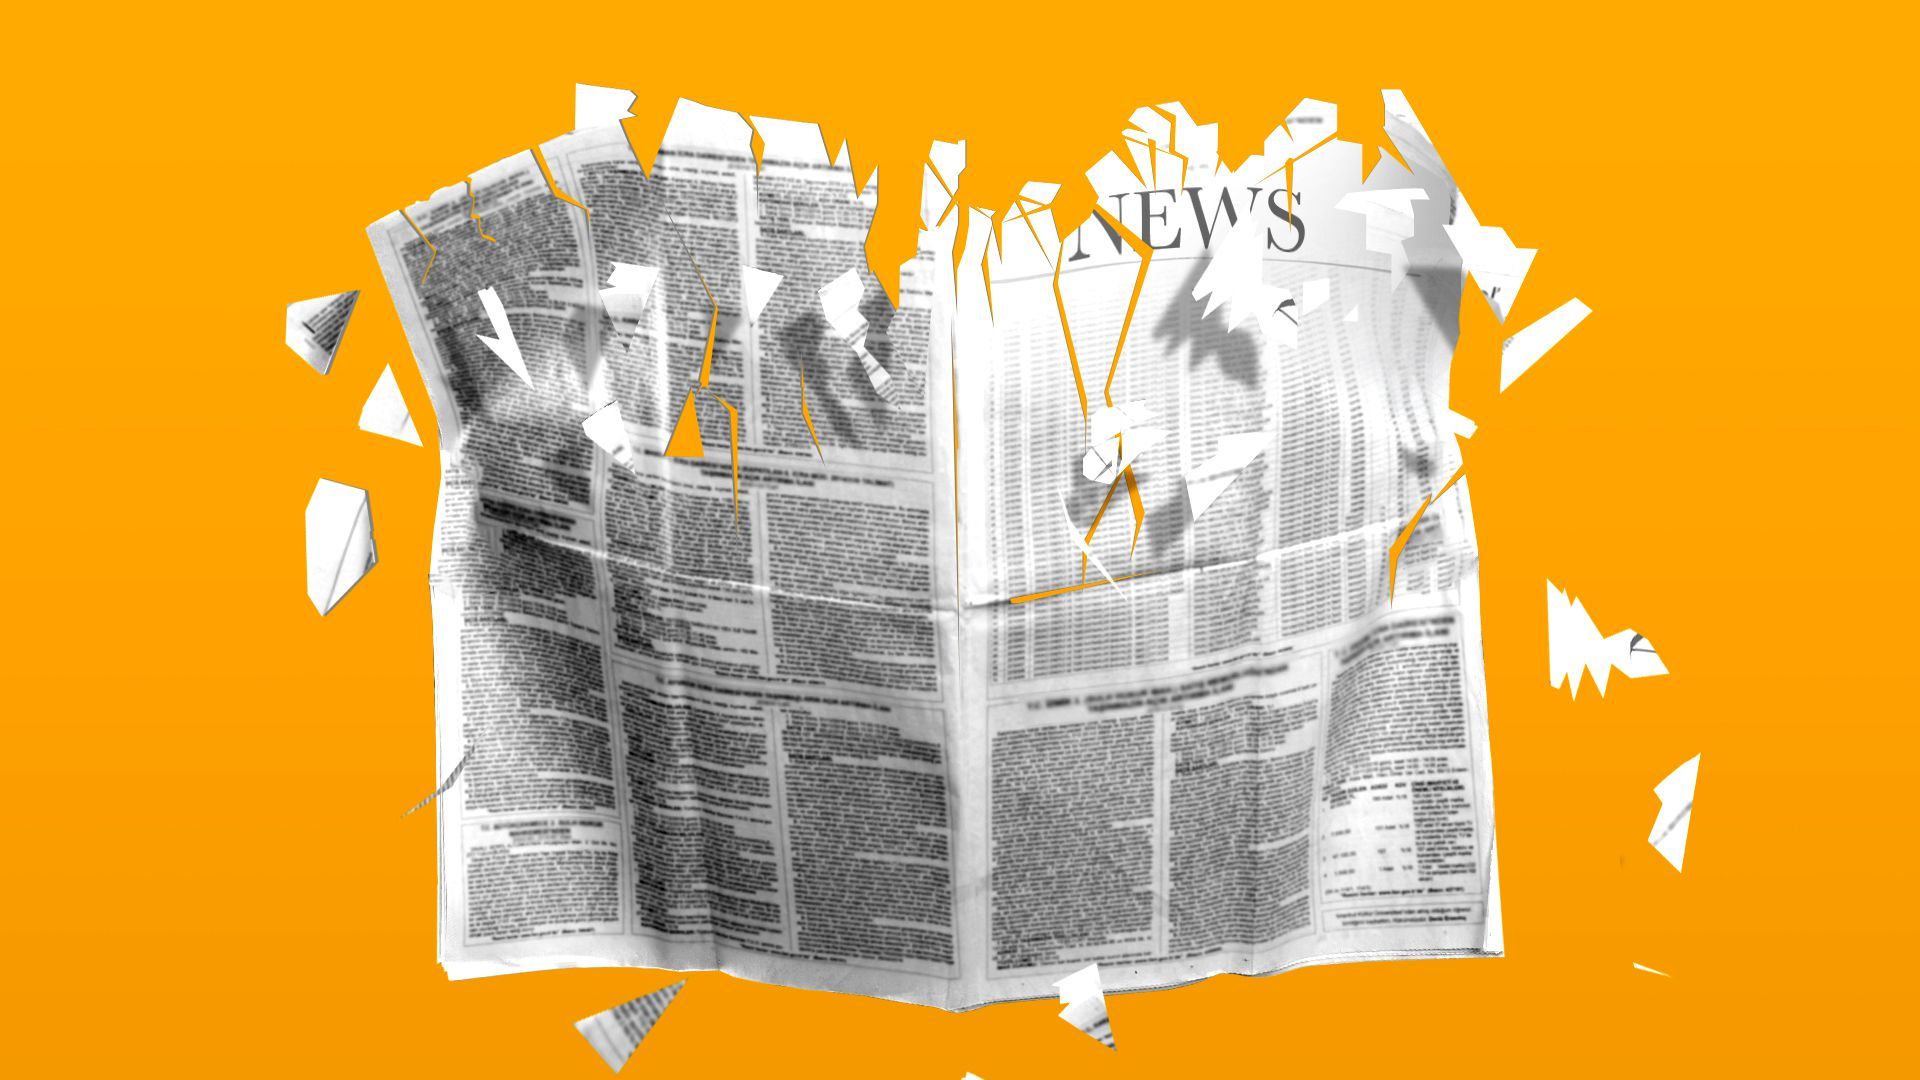 Illustration of a crumbling newspaper